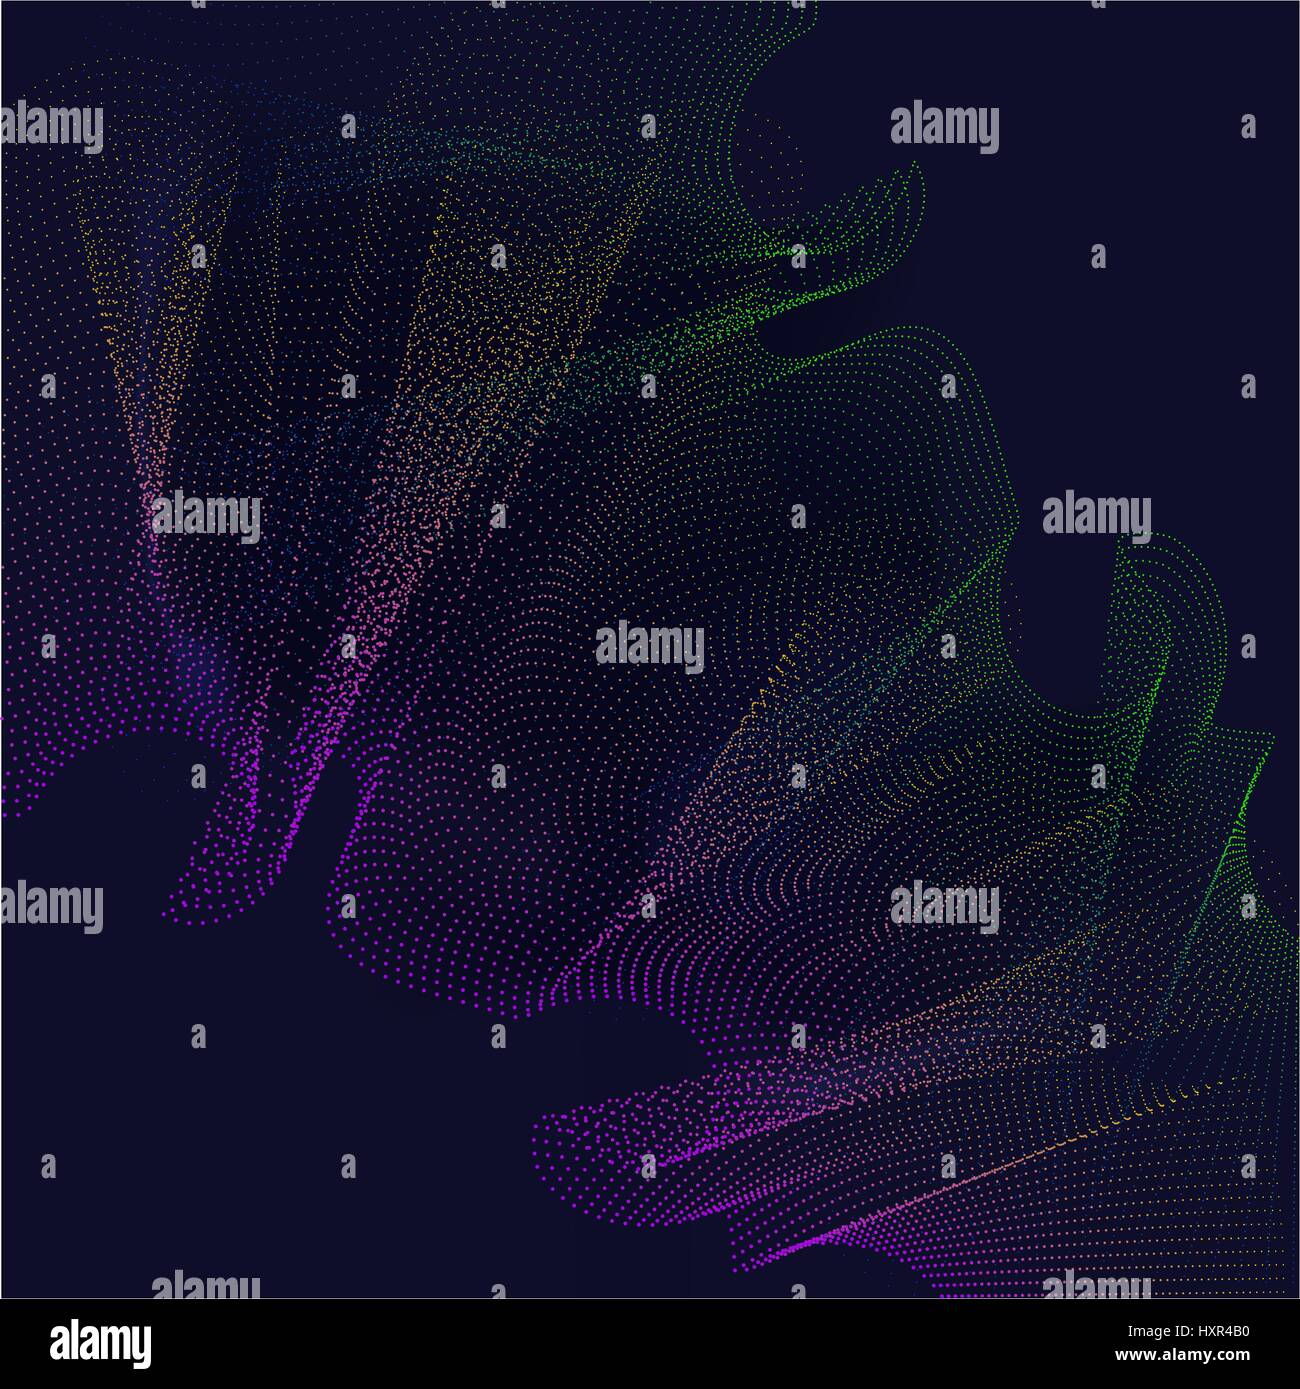 Abstract 3d wave grid made of colorful particles, distorted mesh texture background. EPS10 vector. Stock Vector